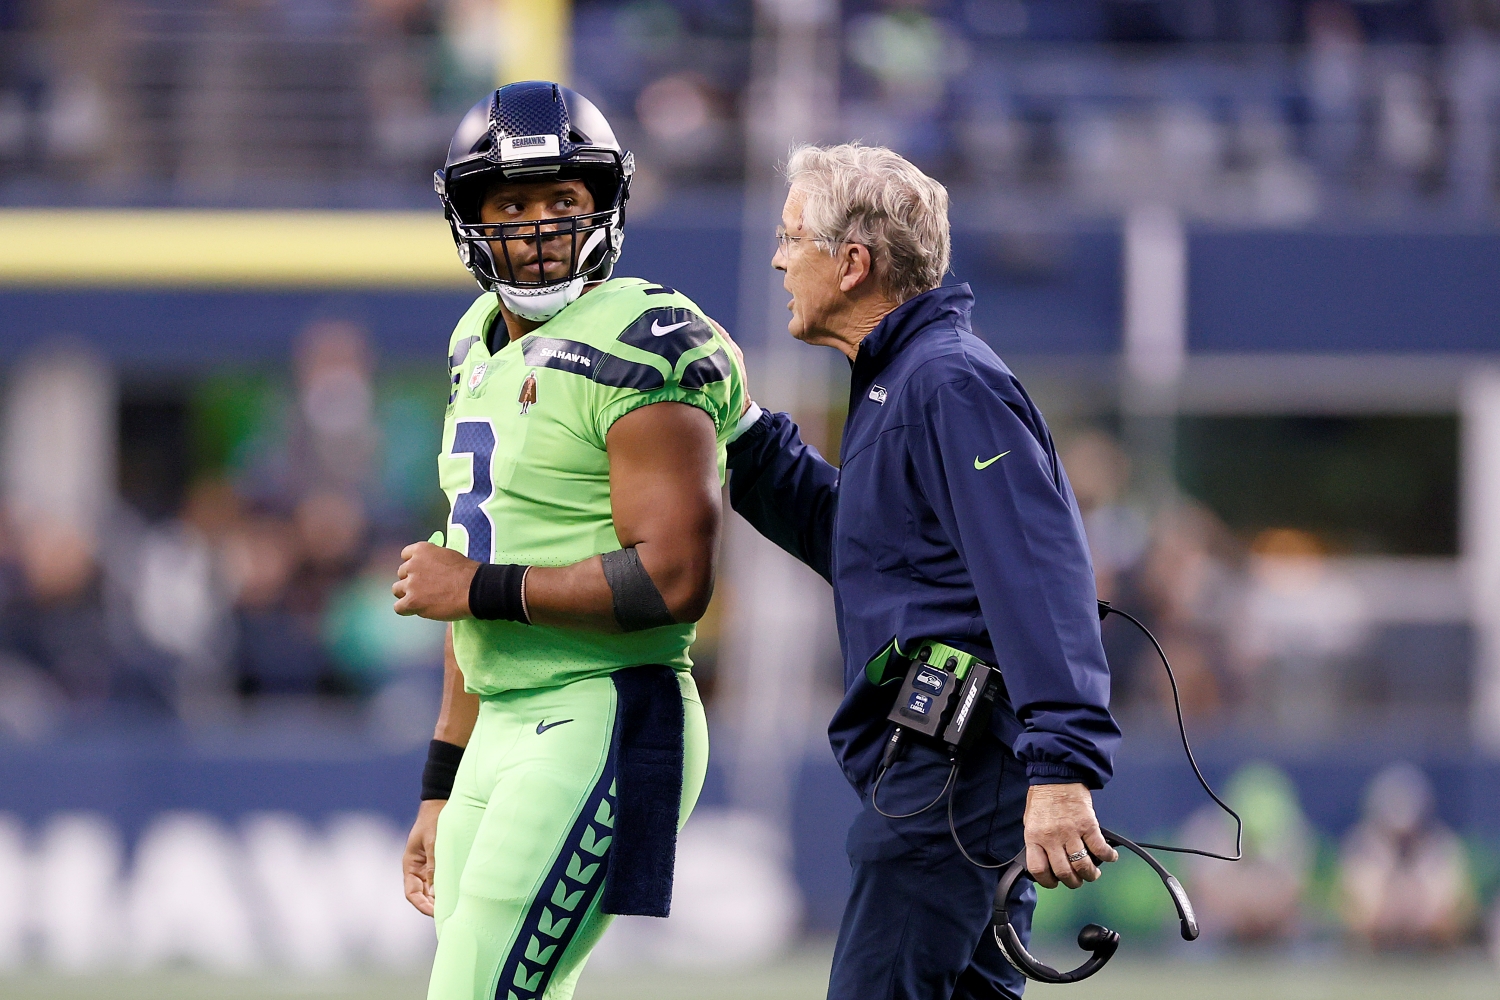 Seattle Seahawks head coach Pete Carroll speaks to quarterback Russell Wilson during a game against the Los Angeles Rams.